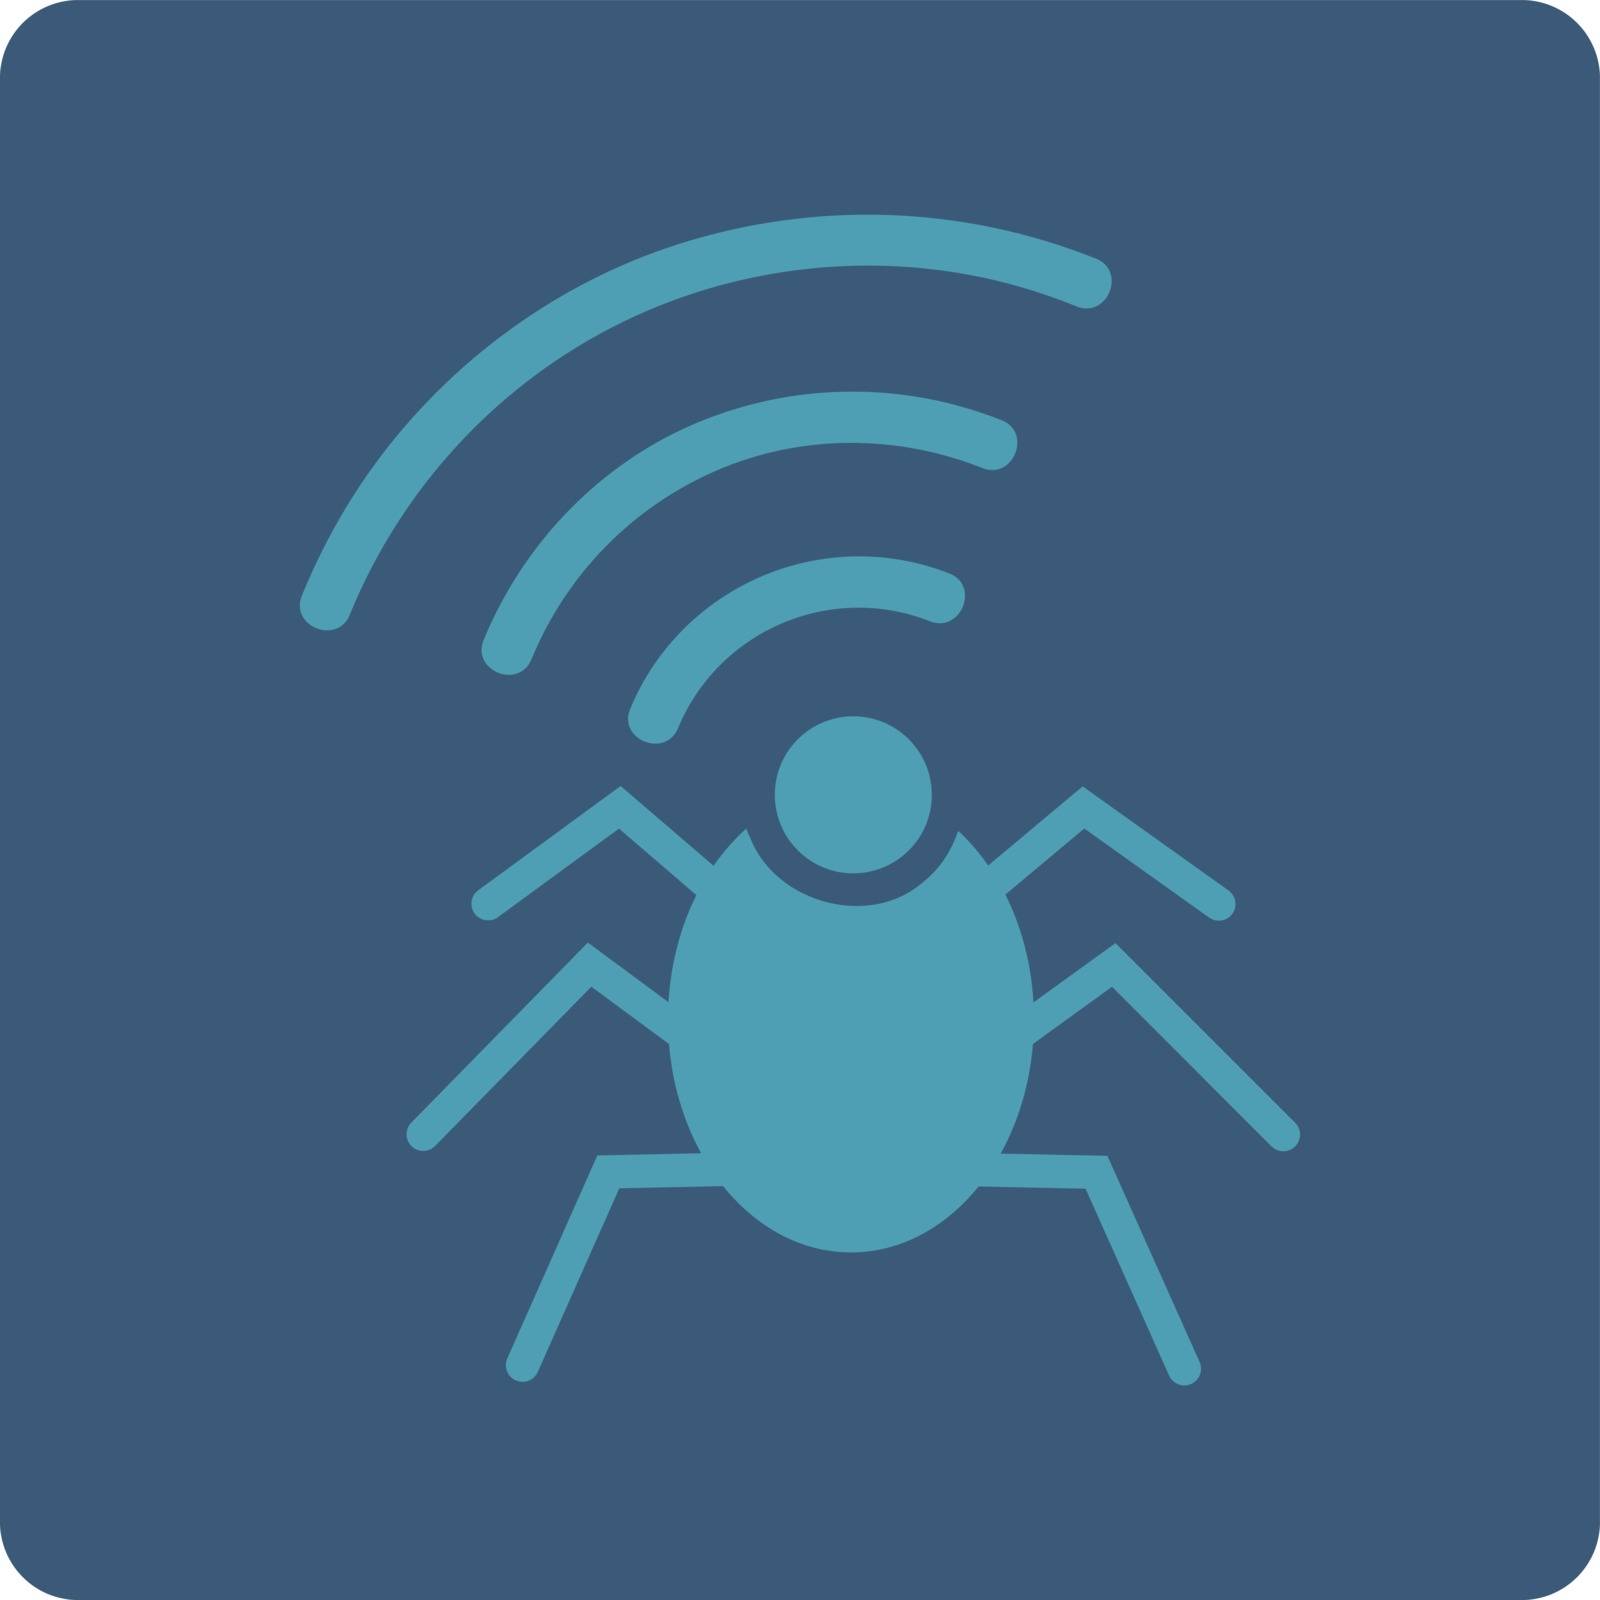 Radio spy bug icon. Vector style is cyan and blue colors, flat rounded square button on a white background.